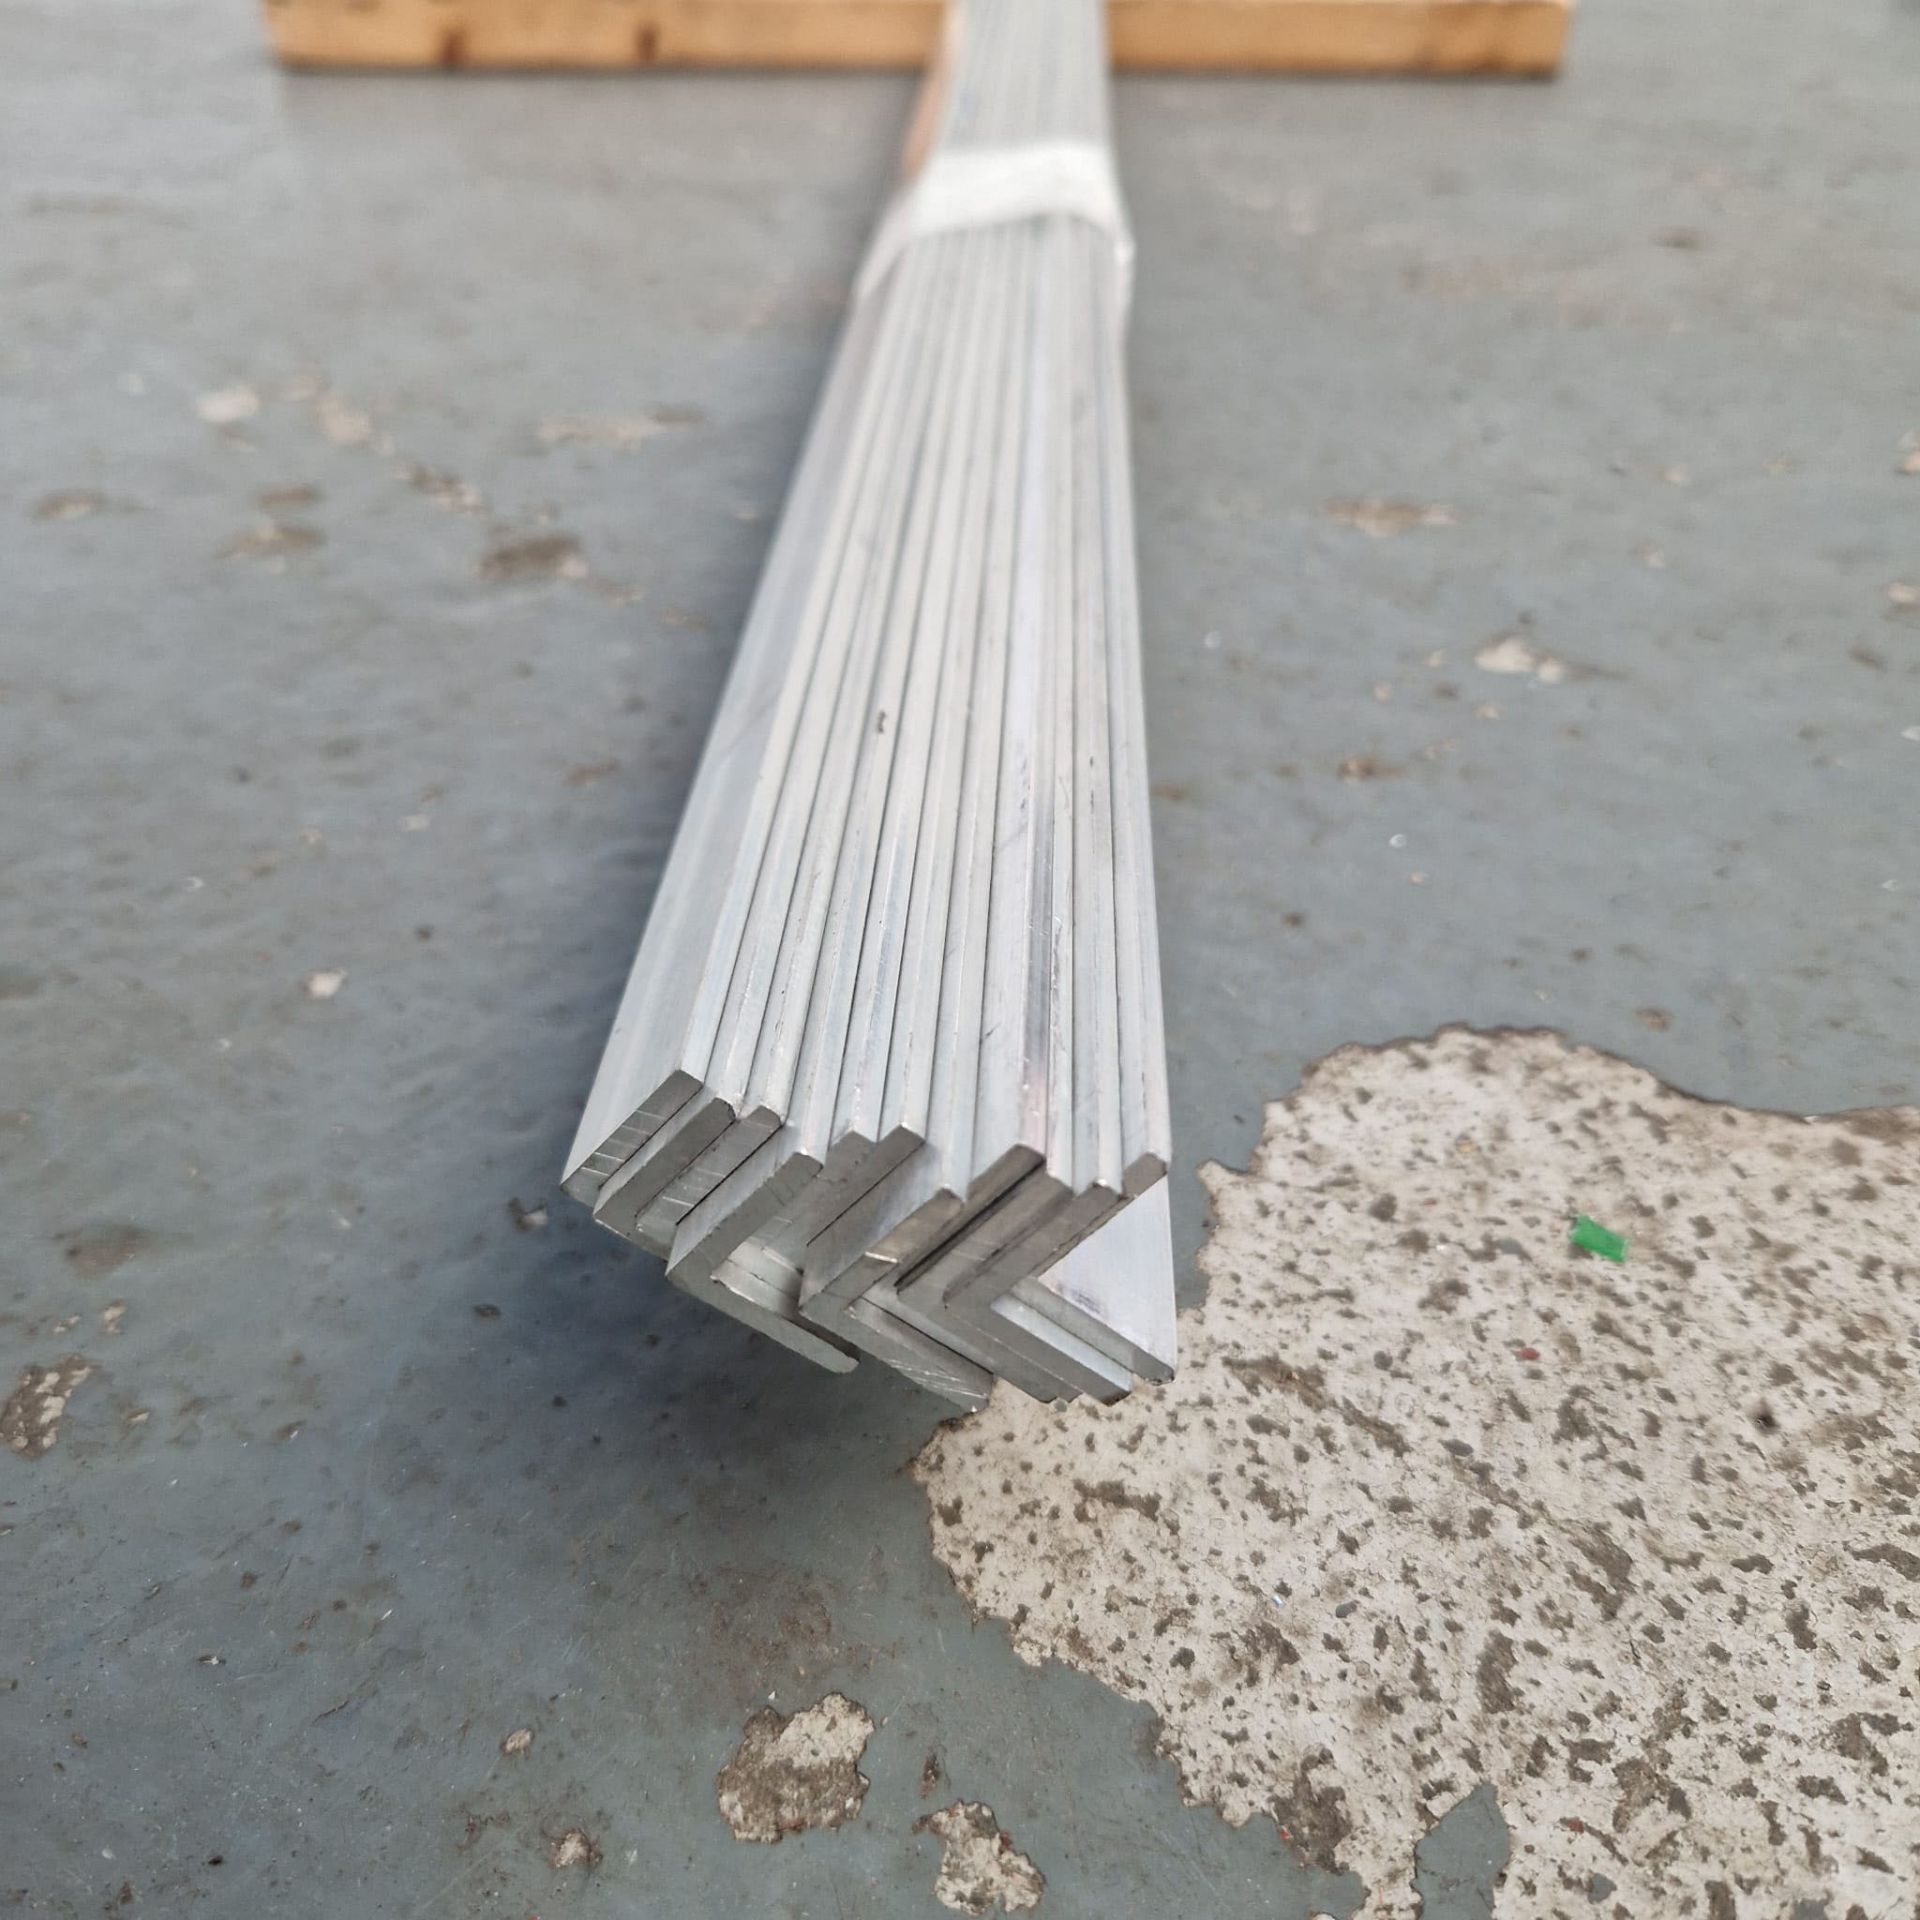 11 x Lengths of Aluminium 'L' Shape Angle Plate. Length: 5000mm. Dimensions: 22 x 22 x 3mm. - Image 4 of 7